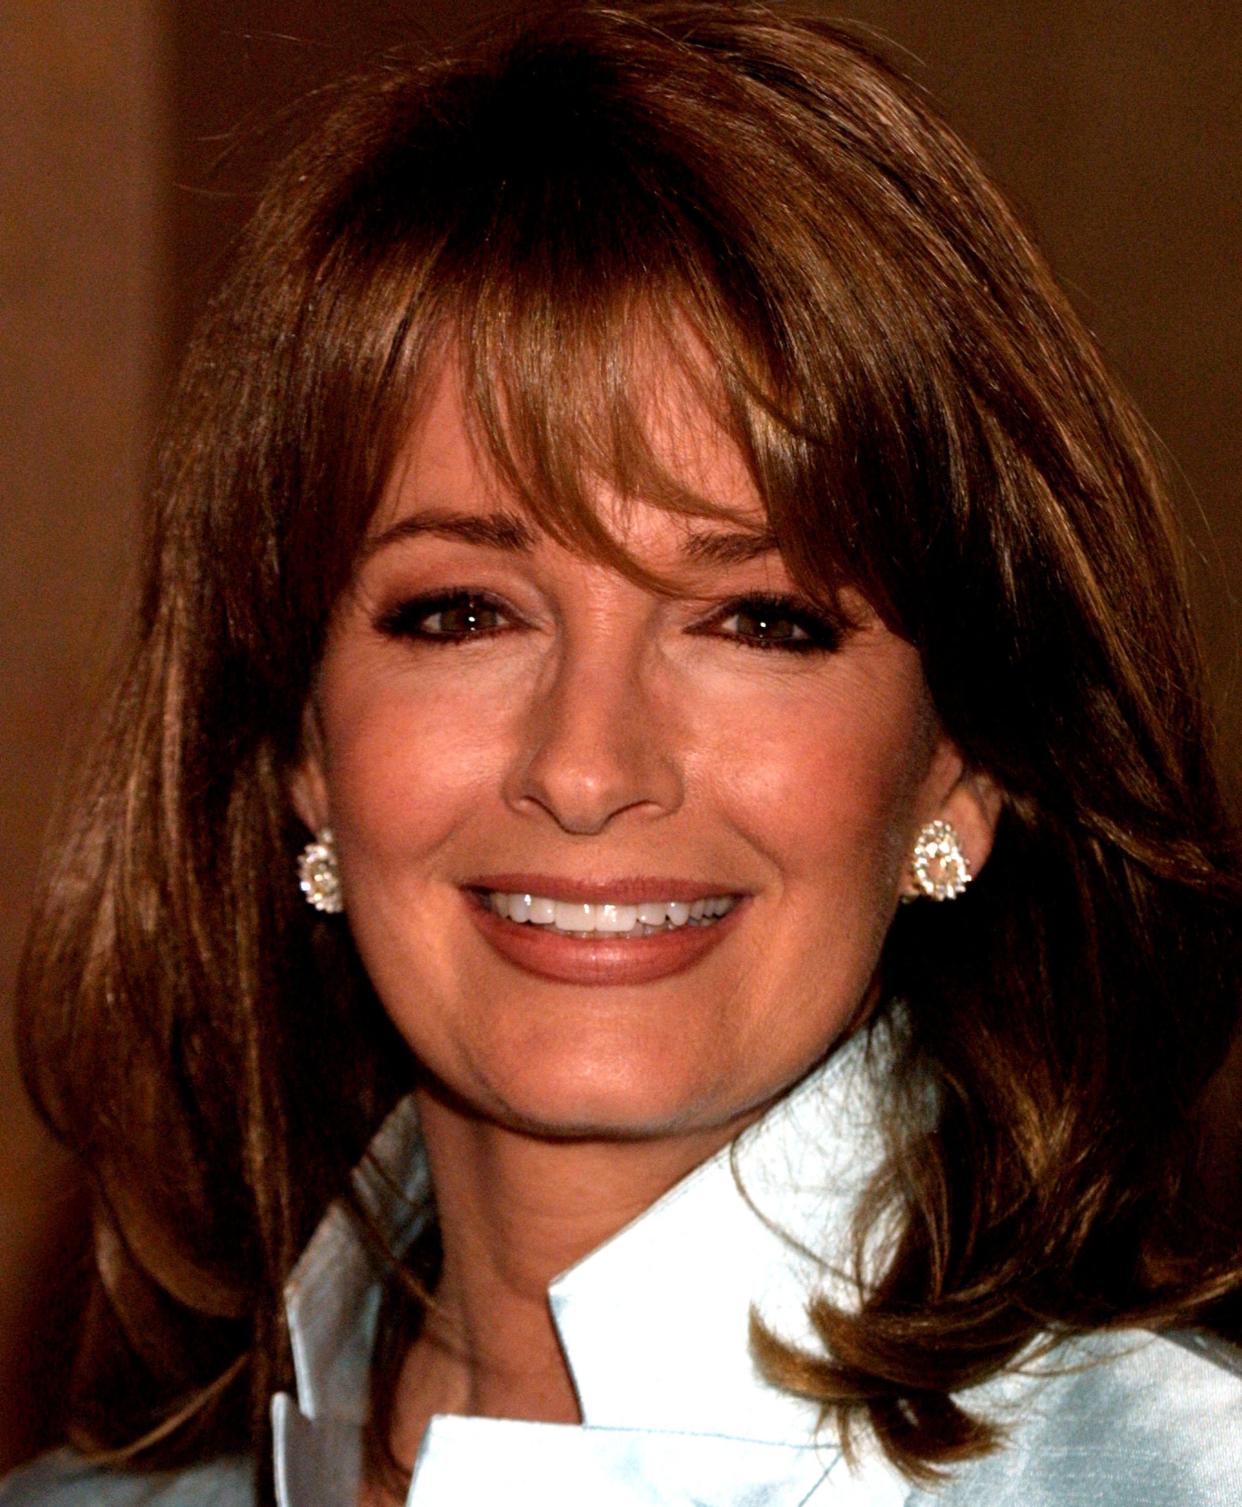 "Days of Our Lives" star Deidre Hall, shown in 2002, was born in Milwaukee.